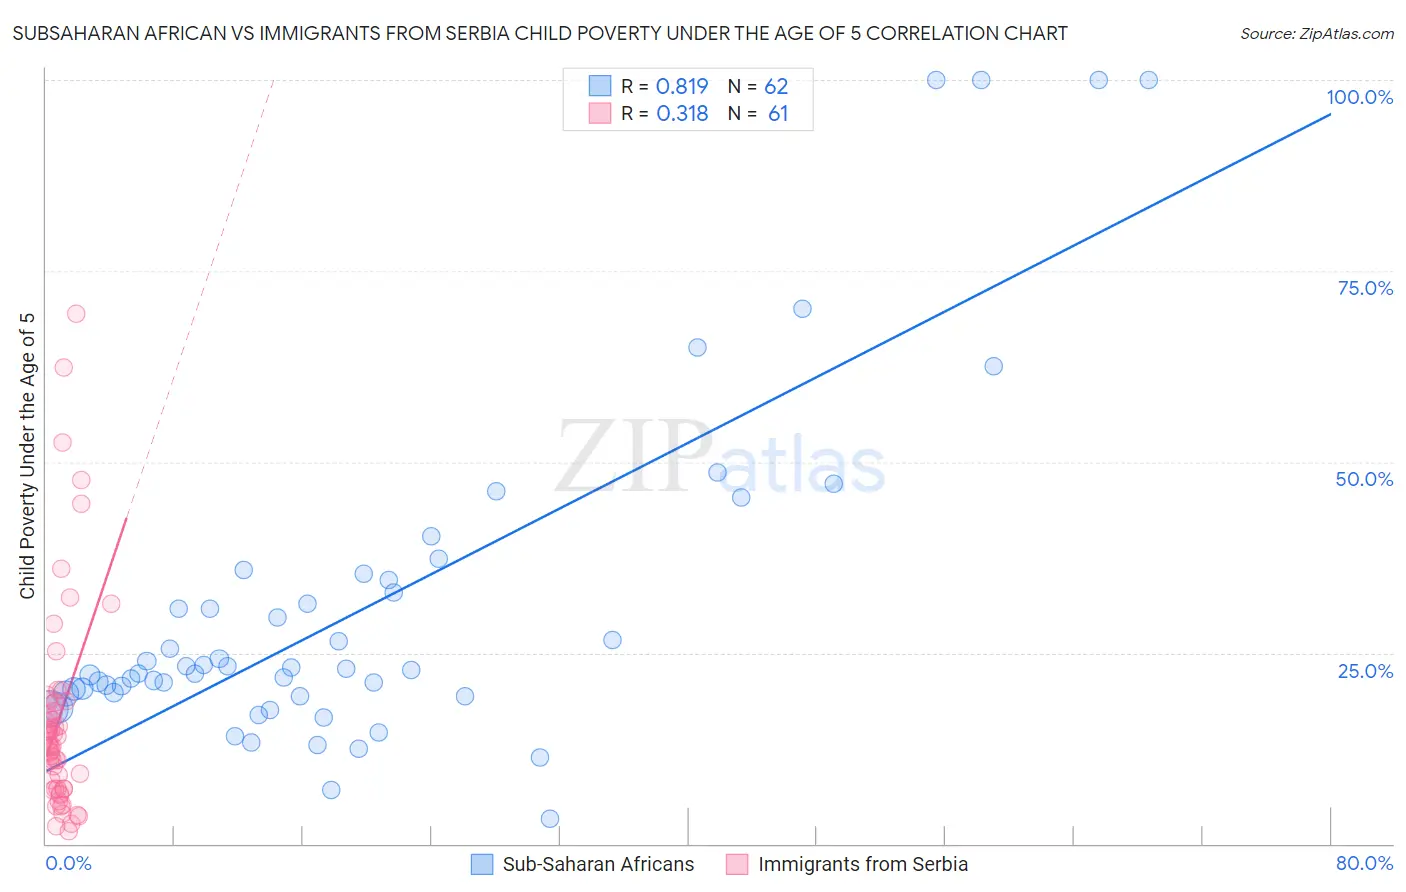 Subsaharan African vs Immigrants from Serbia Child Poverty Under the Age of 5